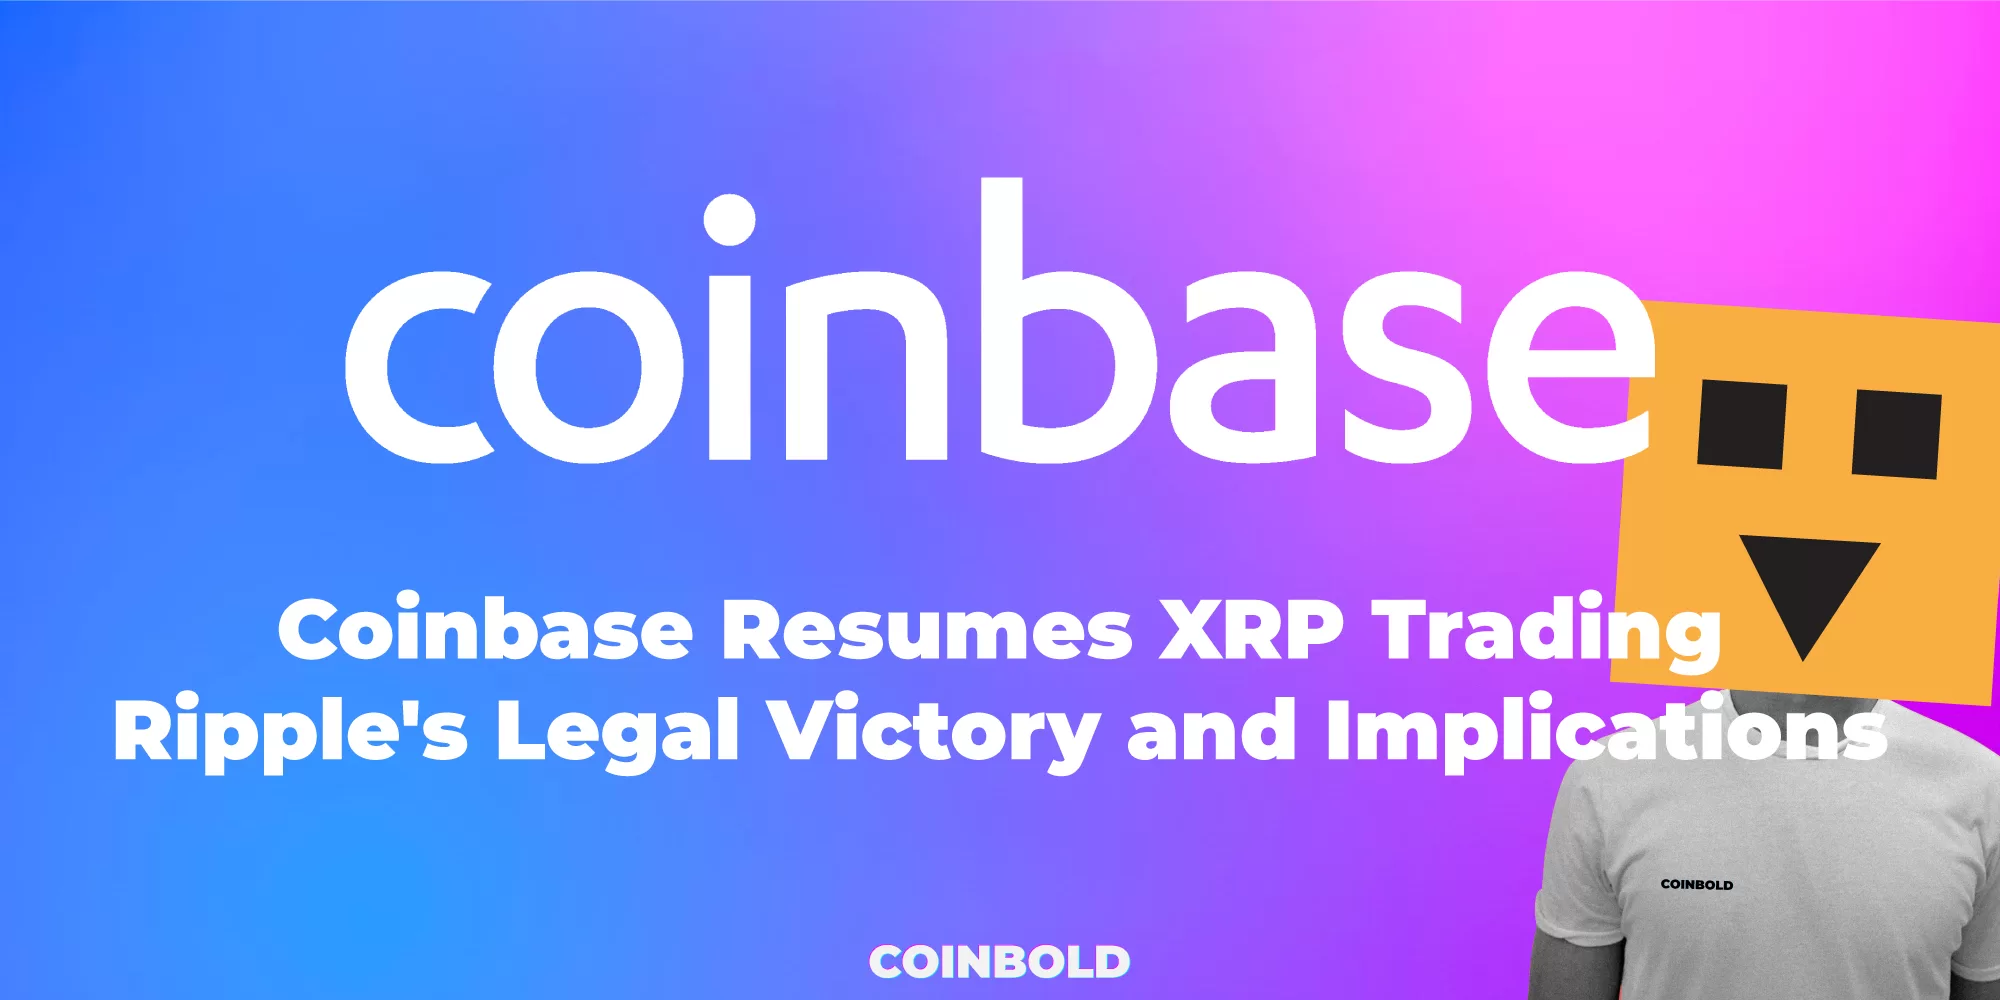 Coinbase Resumes XRP Trading: Ripple's Legal Victory and Implications